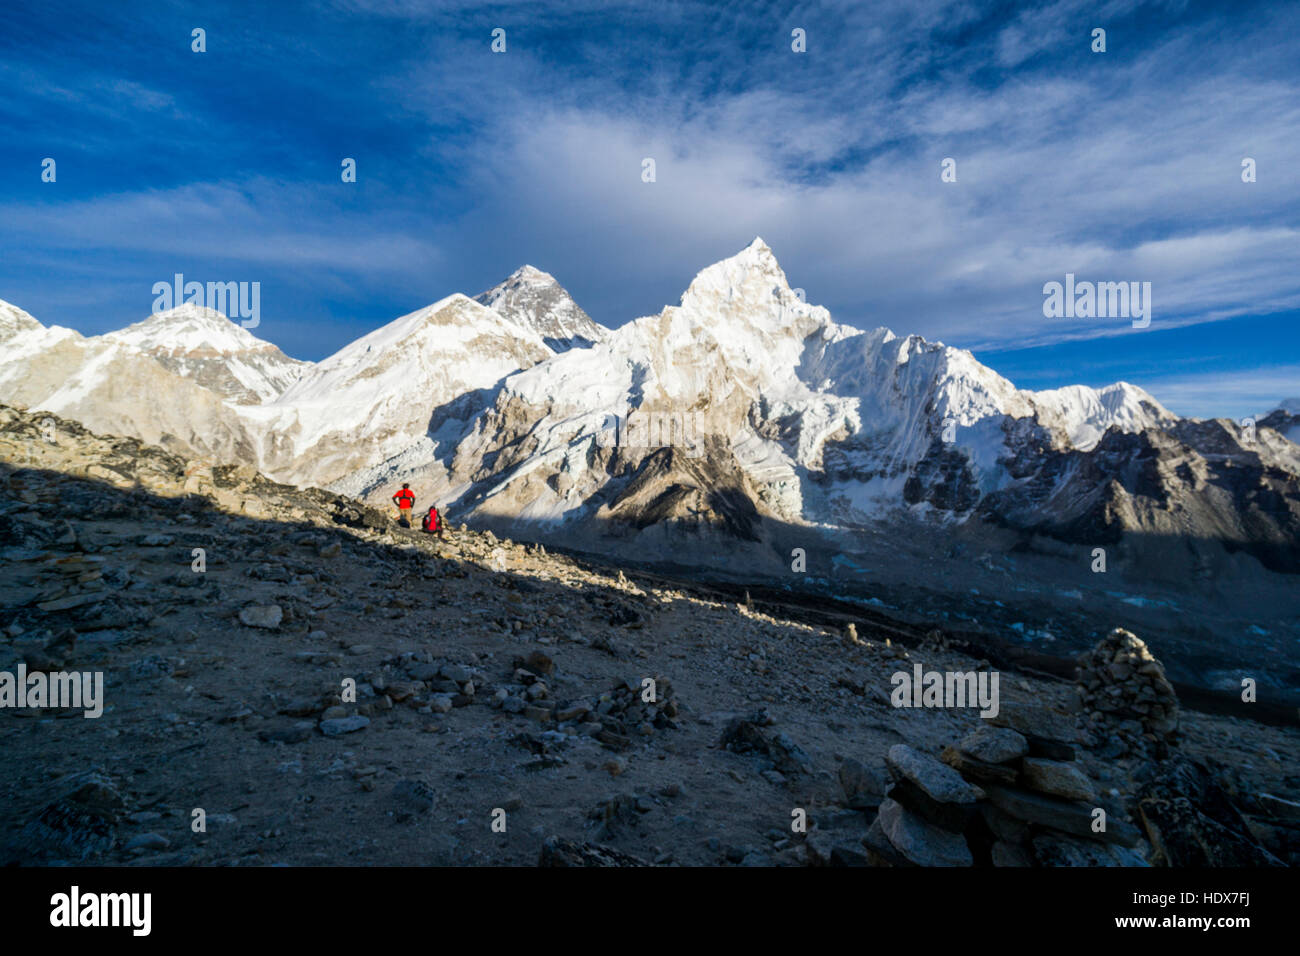 The massif of the mountains around Mt. Everest (8848m) and Nuptse (7861m) at sunset, seen from Kala Pathar (5545m) Stock Photo